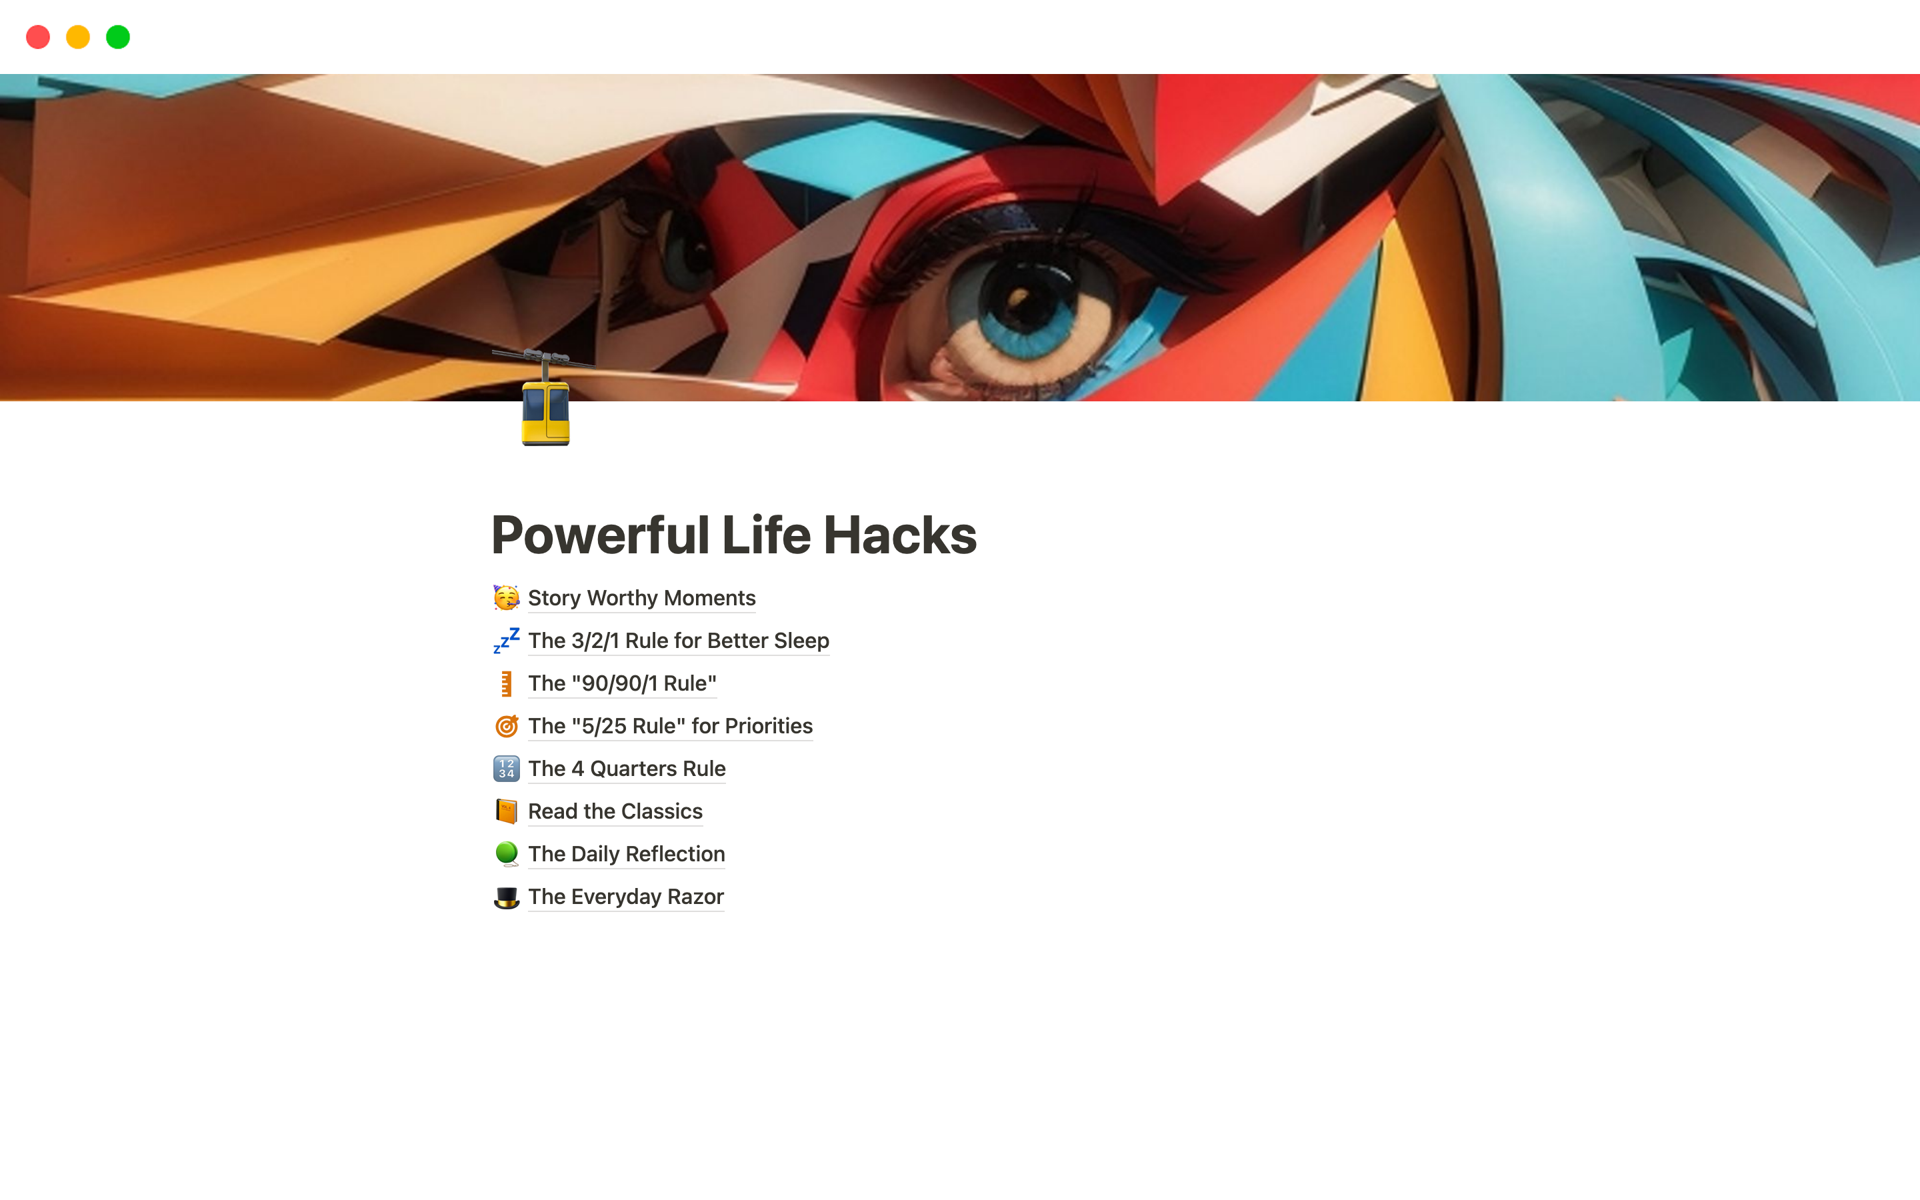 Lifehacks Template: A Notion template that includes 10 lifehacks to help you improve your productivity, focus, and overall well-being.